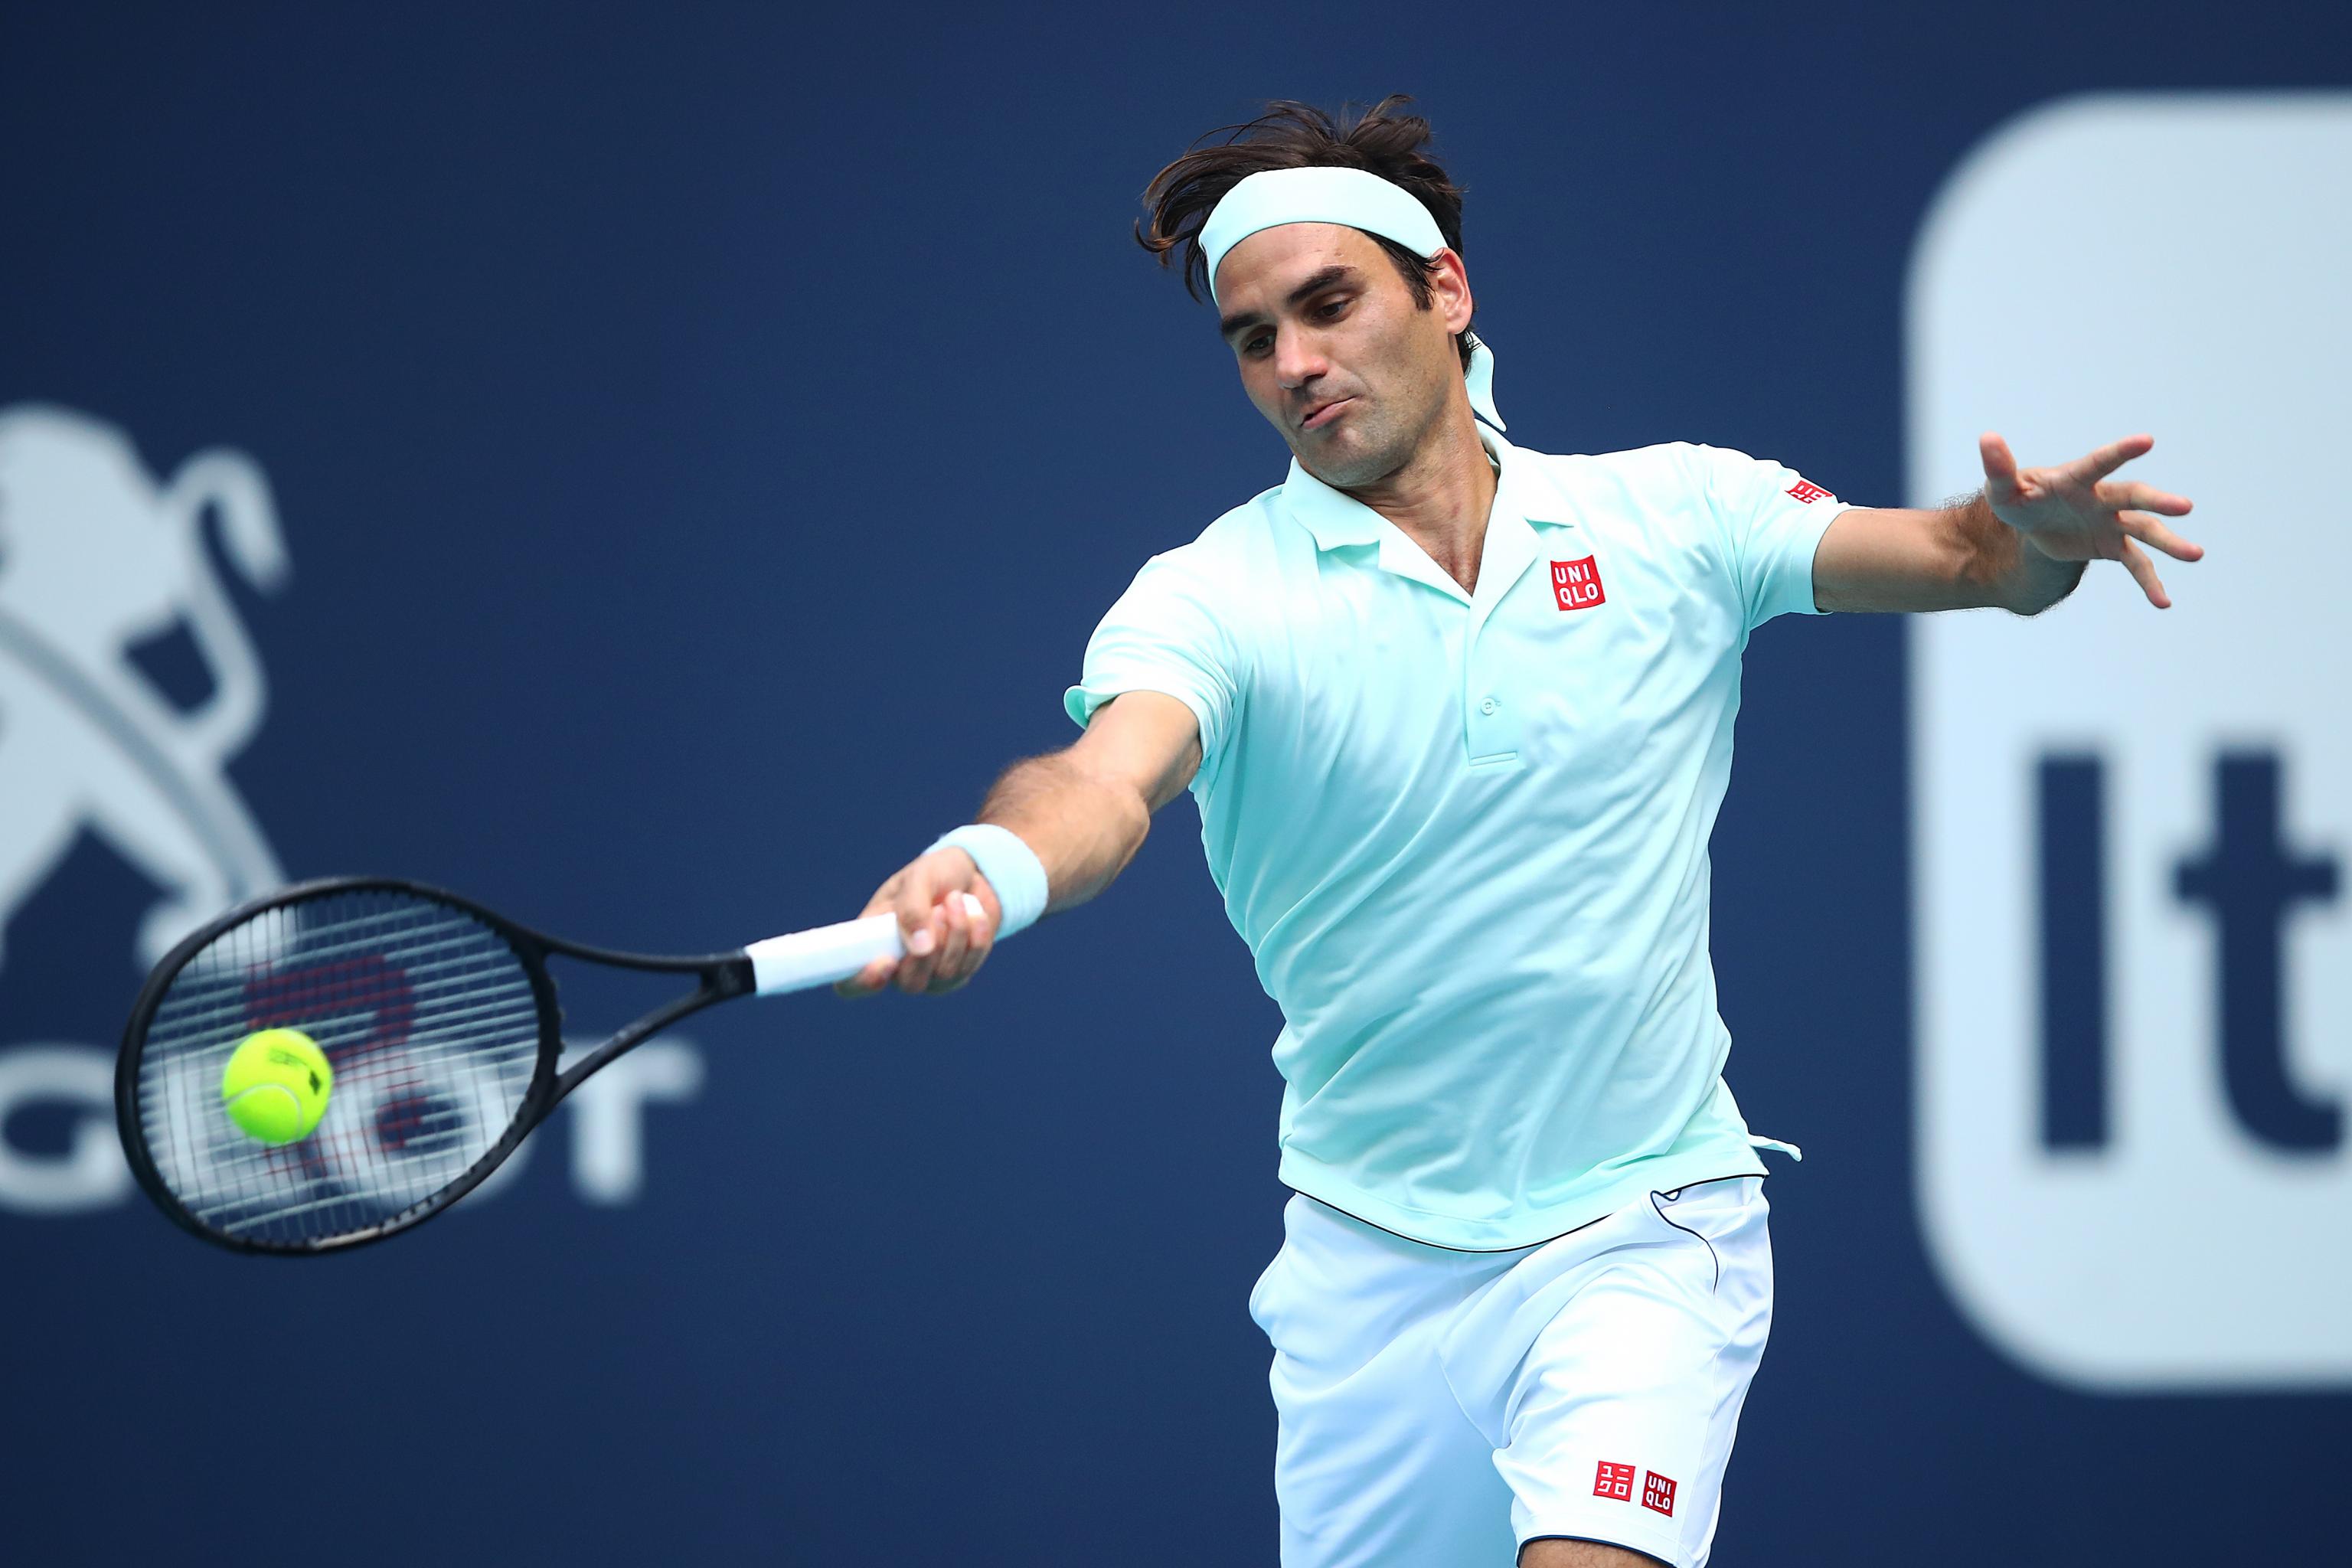 Miami Open Masters 2019 Results Wednesday Scores, Bracket and Schedule